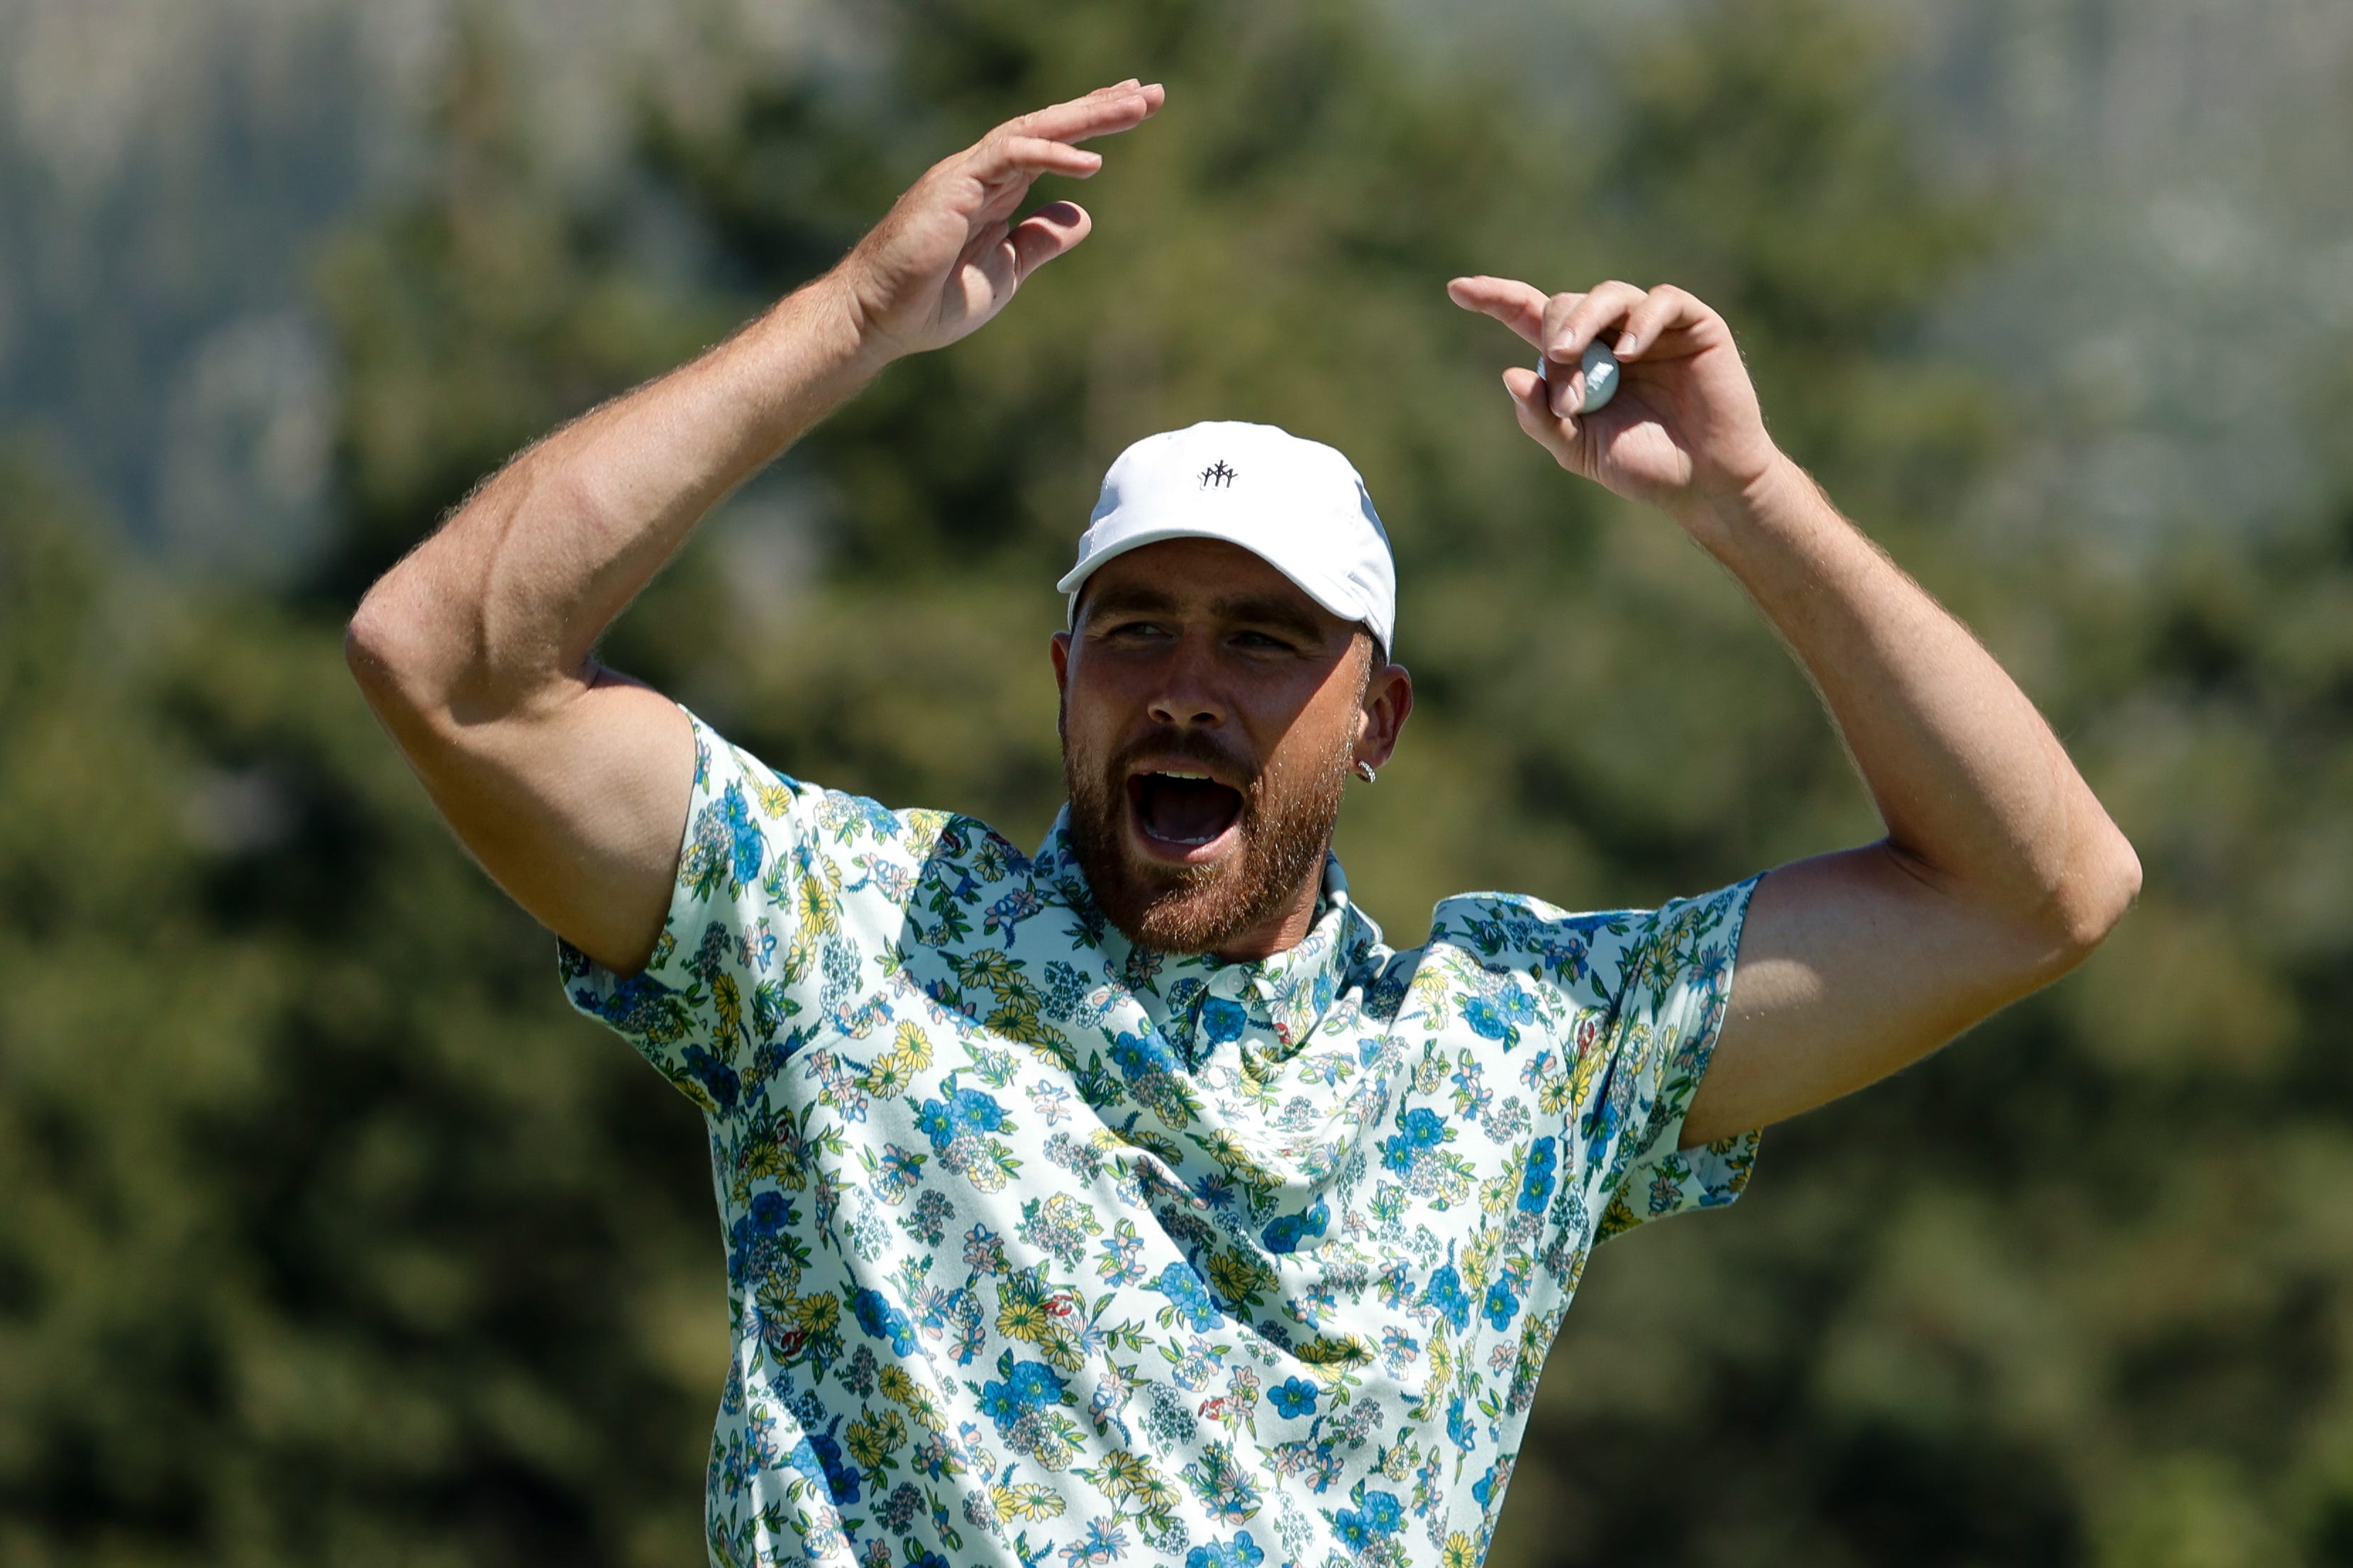 STATELINE, NV - JULY 08: NFL football player Travis Kelce reacts after his group finishes the 18th hole during Round One of the 2022 American Century Championship at Edgewood Tahoe Golf Course on July 8, 2022 in Stateline, Nevada. (Photo by Isaiah Vazquez/Clarkson Creative/Getty Images)